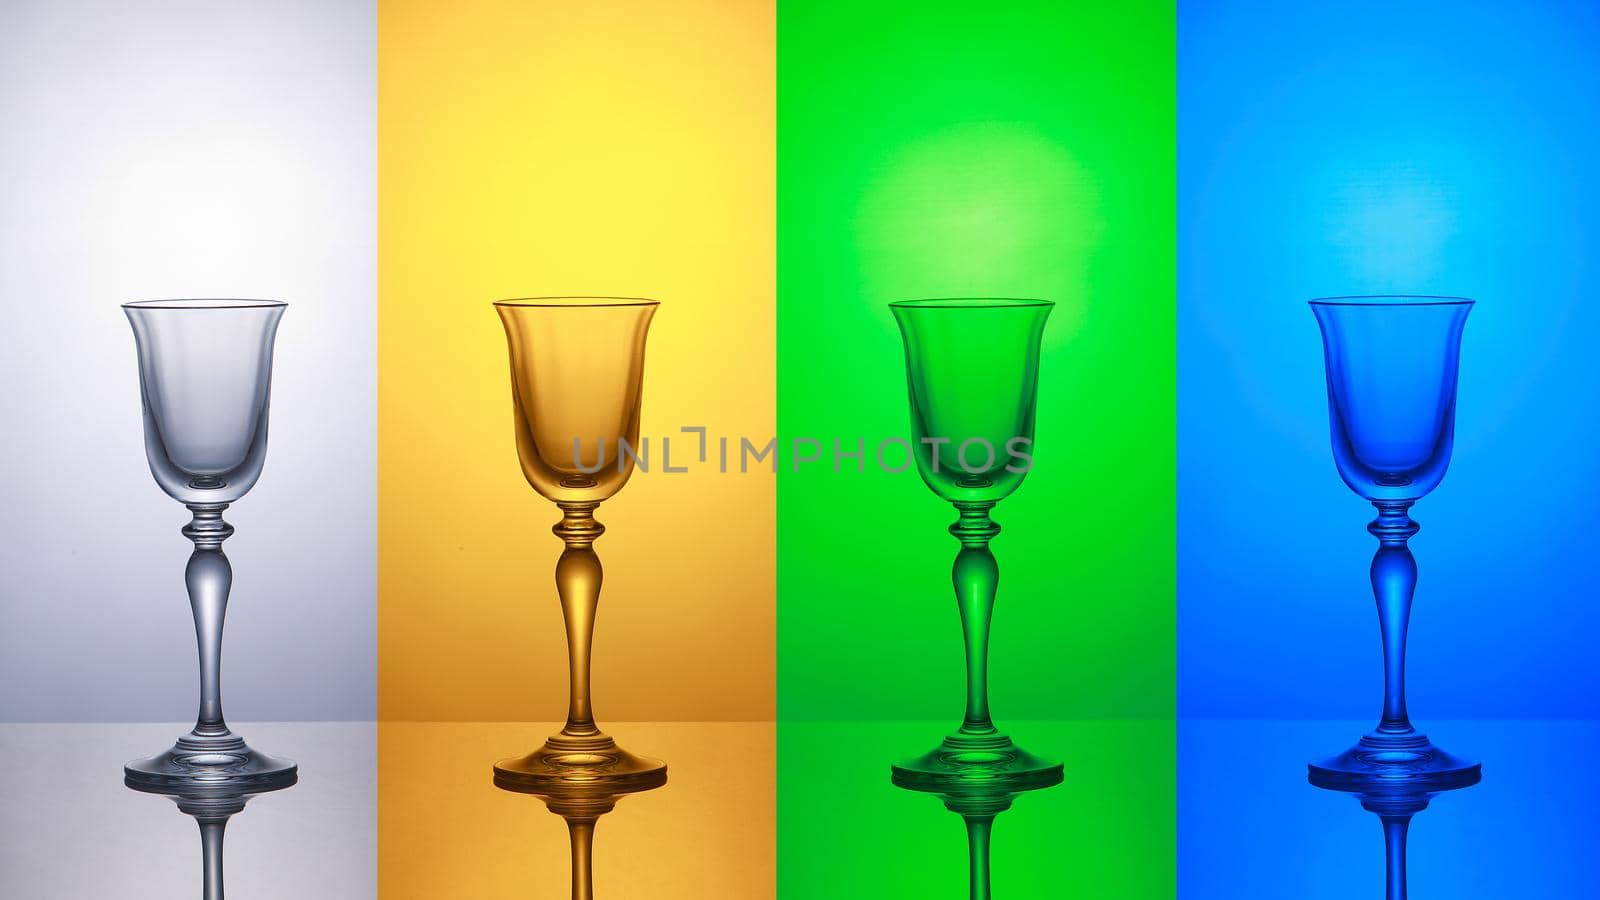 Empty wine glass on a white yellow green blue striped baground by denisv86